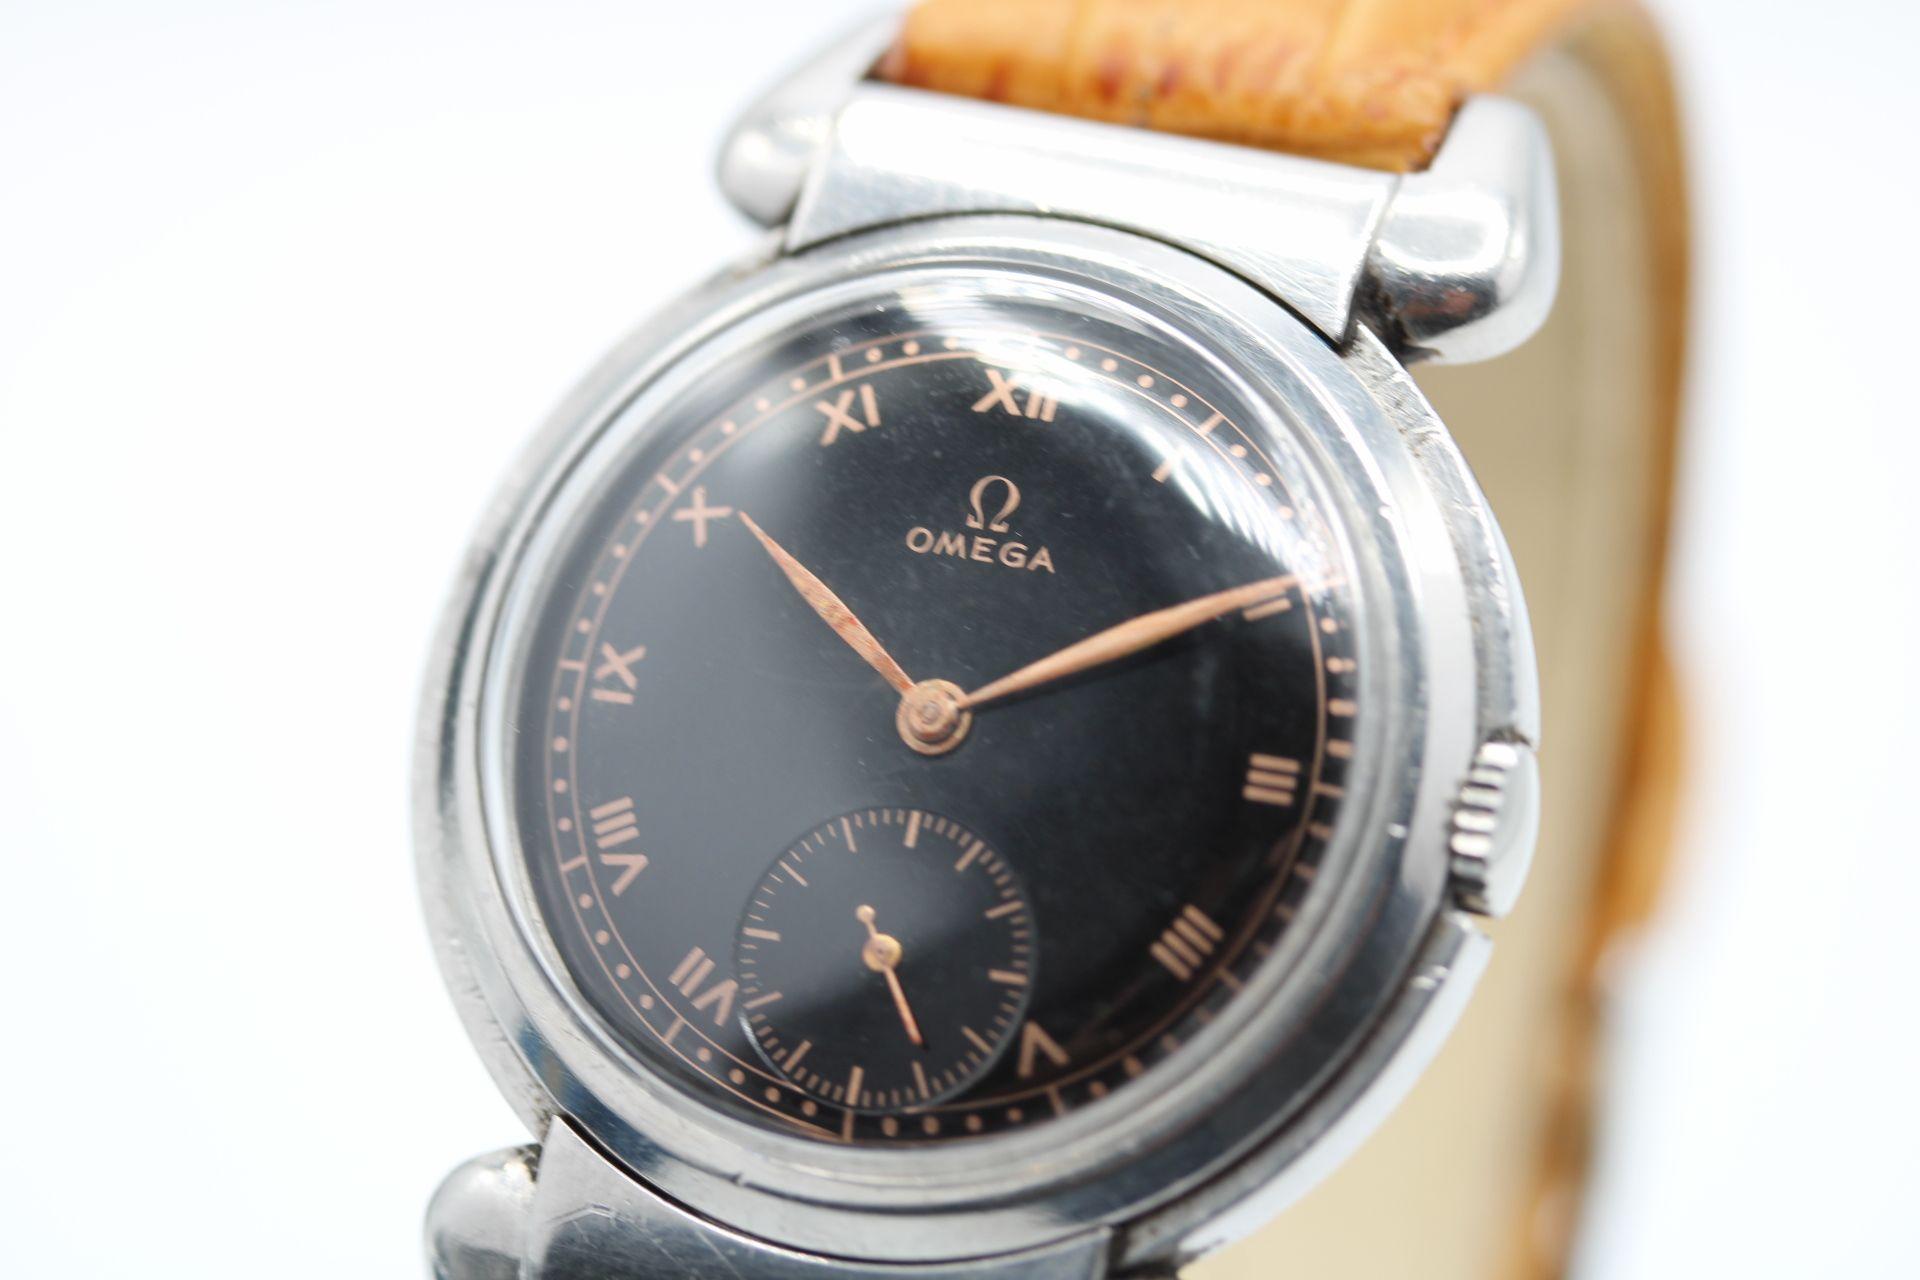 Omega Gilt Dial Caliber 26 1936 Bullhorn Watch In Fair Condition For Sale In London, GB